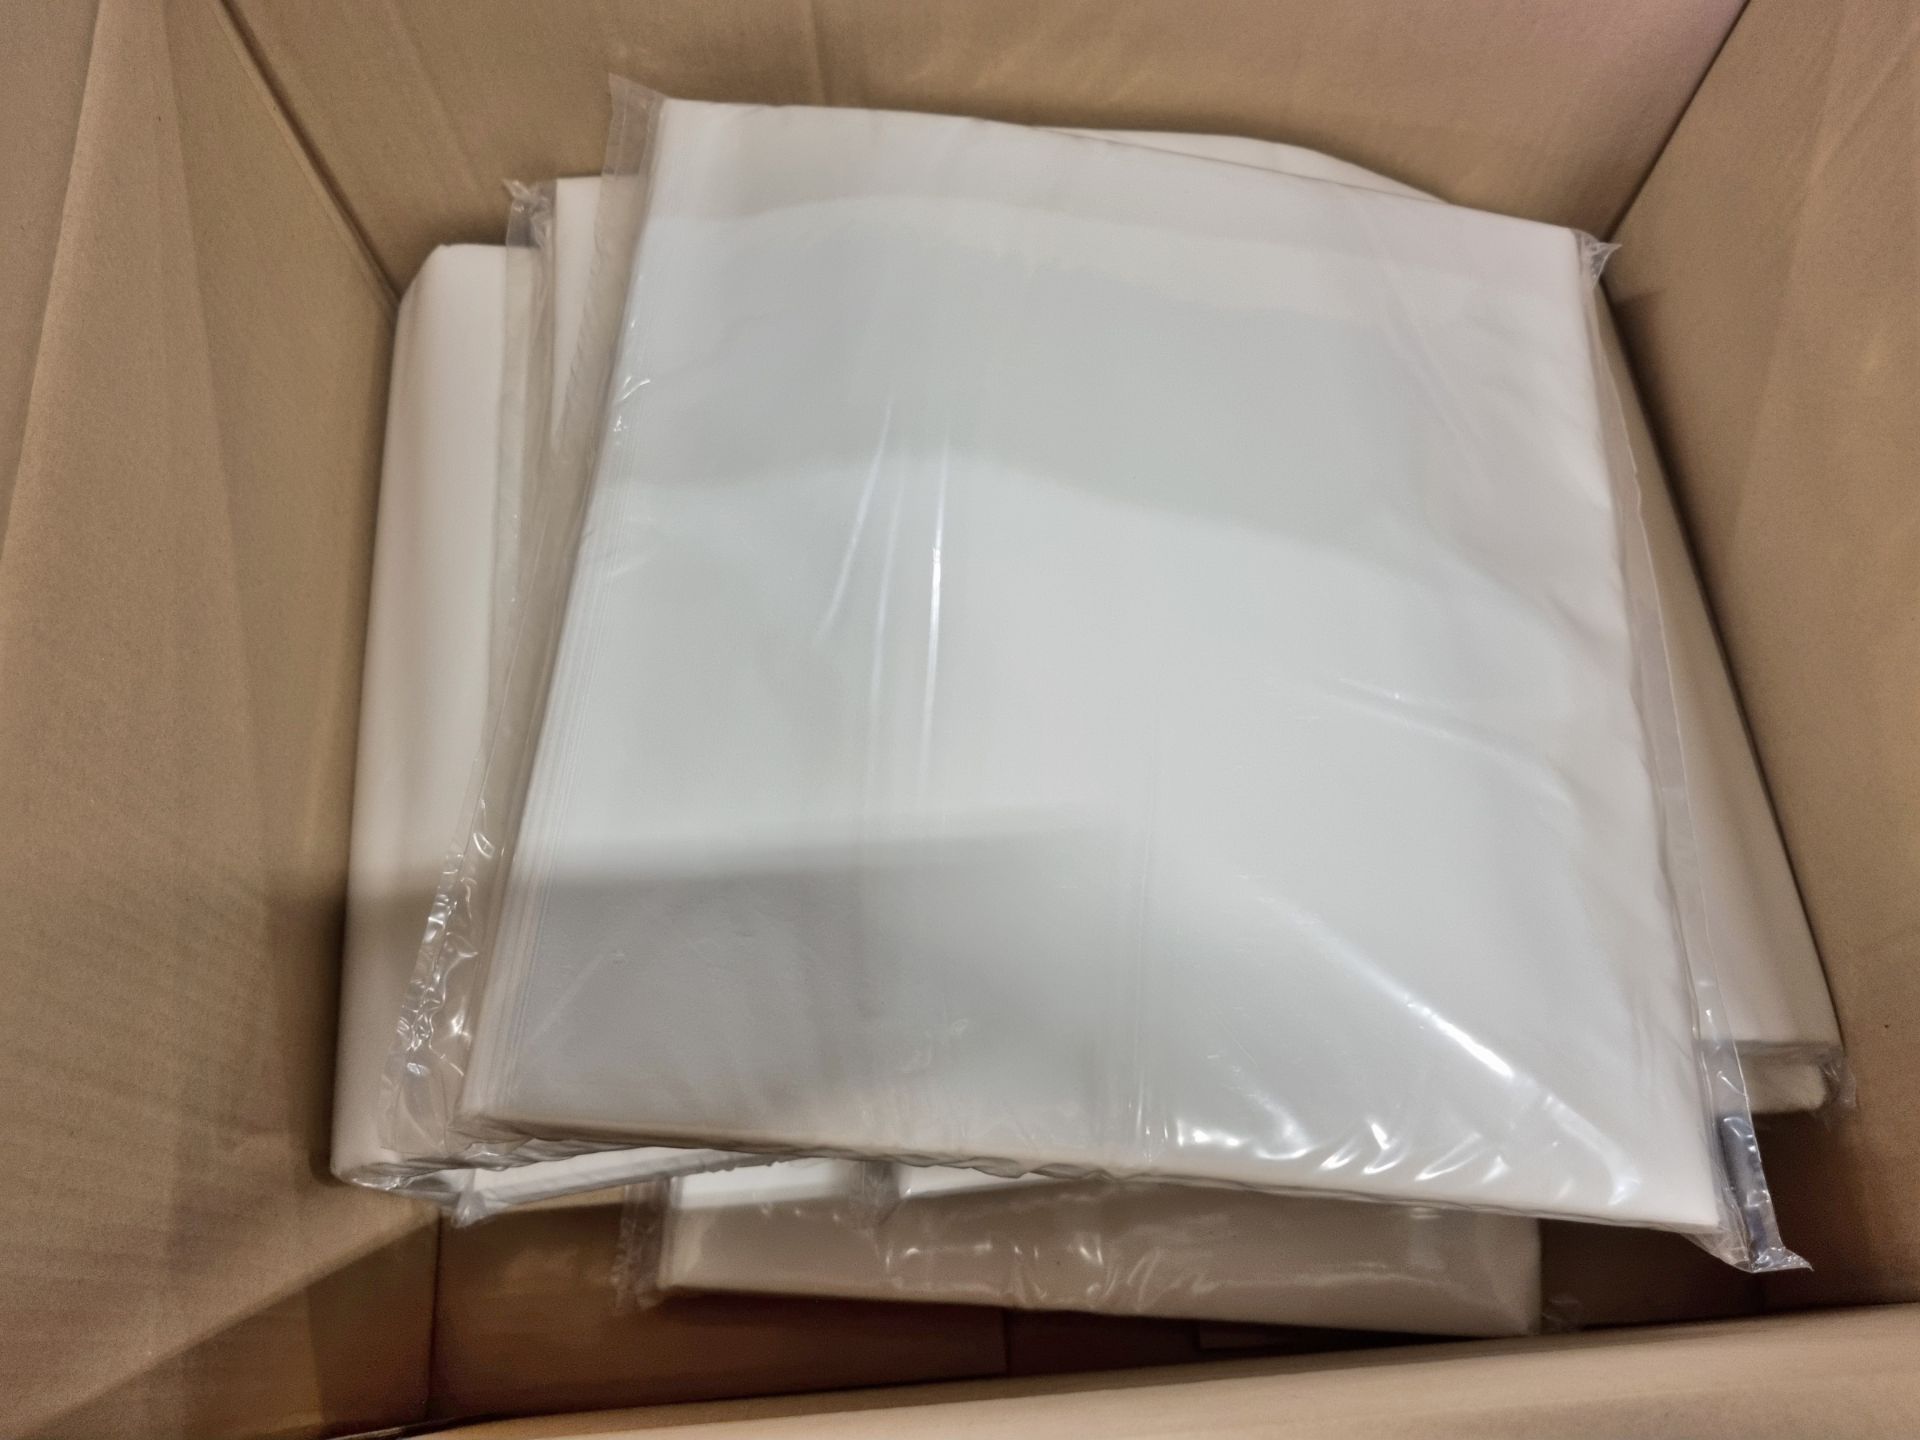 6x boxes of WhiteGuard2 WNWG04016 poly/cellulose dry wipes - 10x100 wipes 16" x 15" per box - Bild 2 aus 3